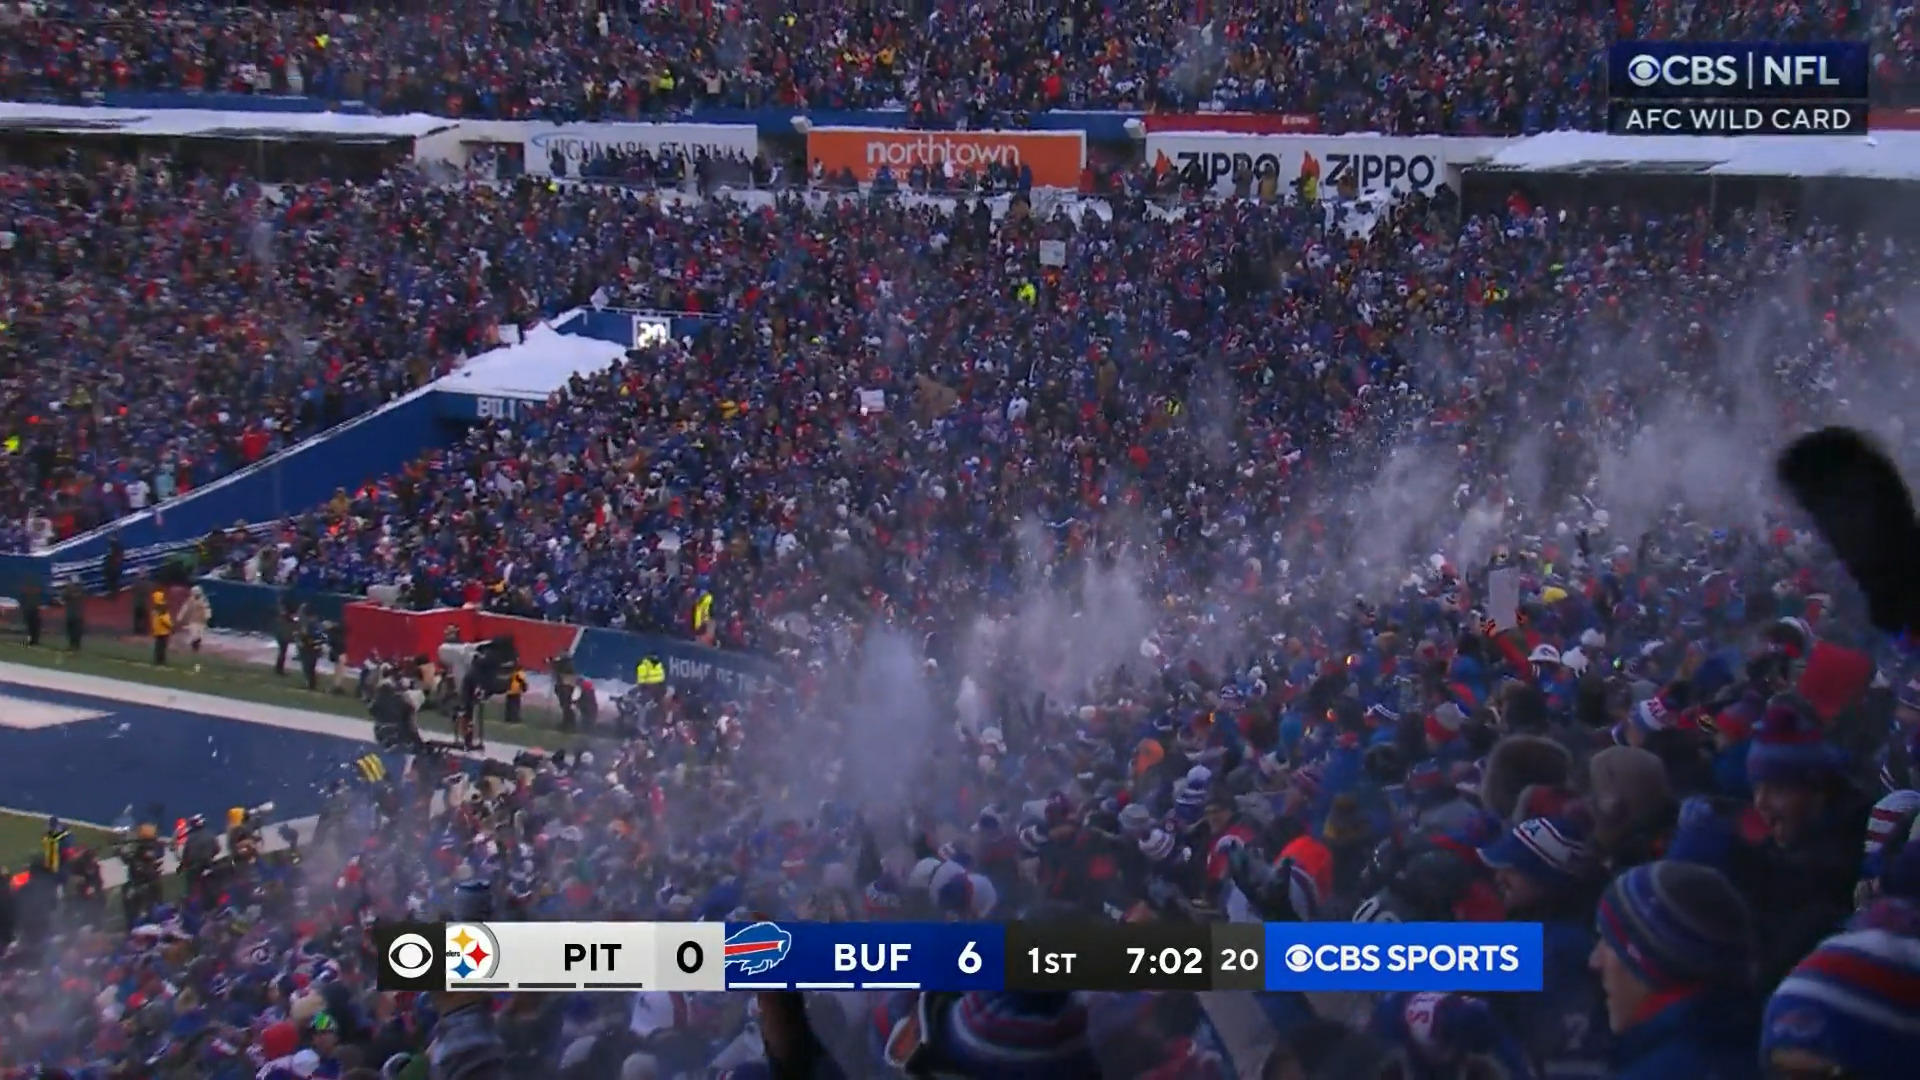 Snowball fight after touchdown!  Bills fans celebrate in the stands